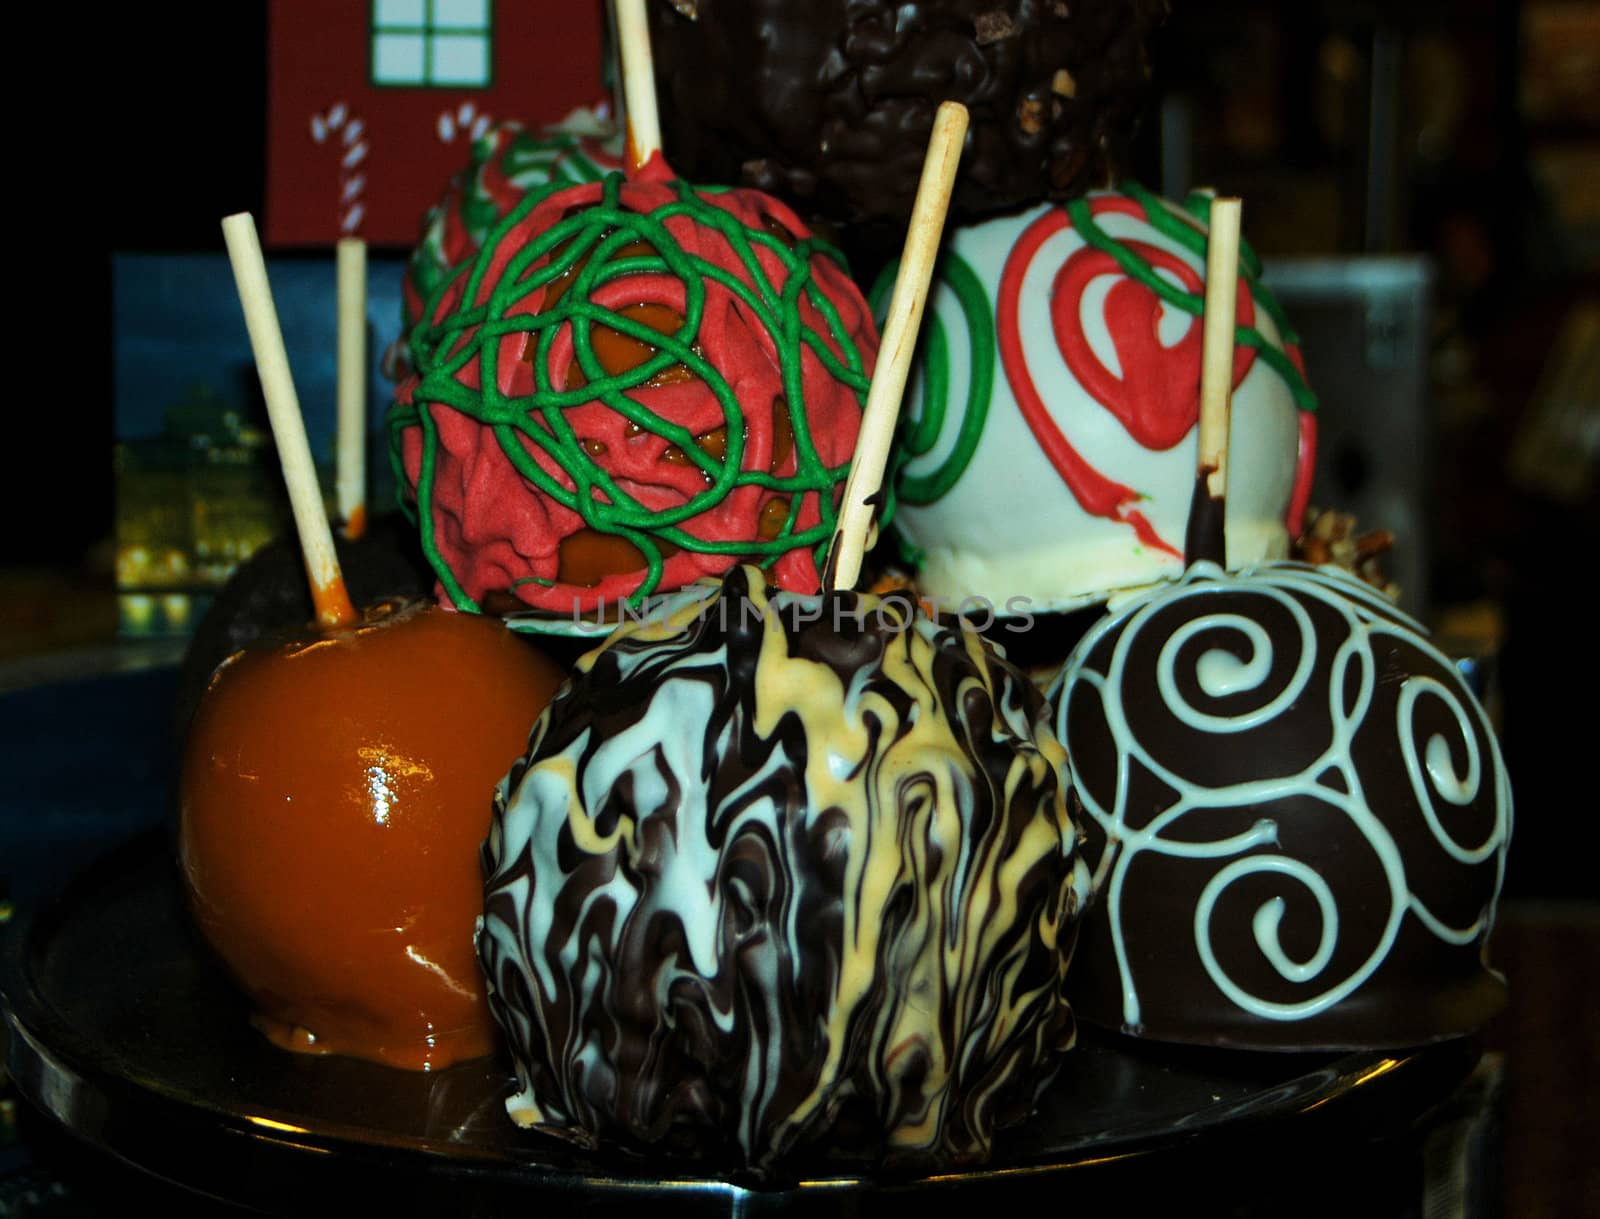 Candy apples by northwoodsphoto